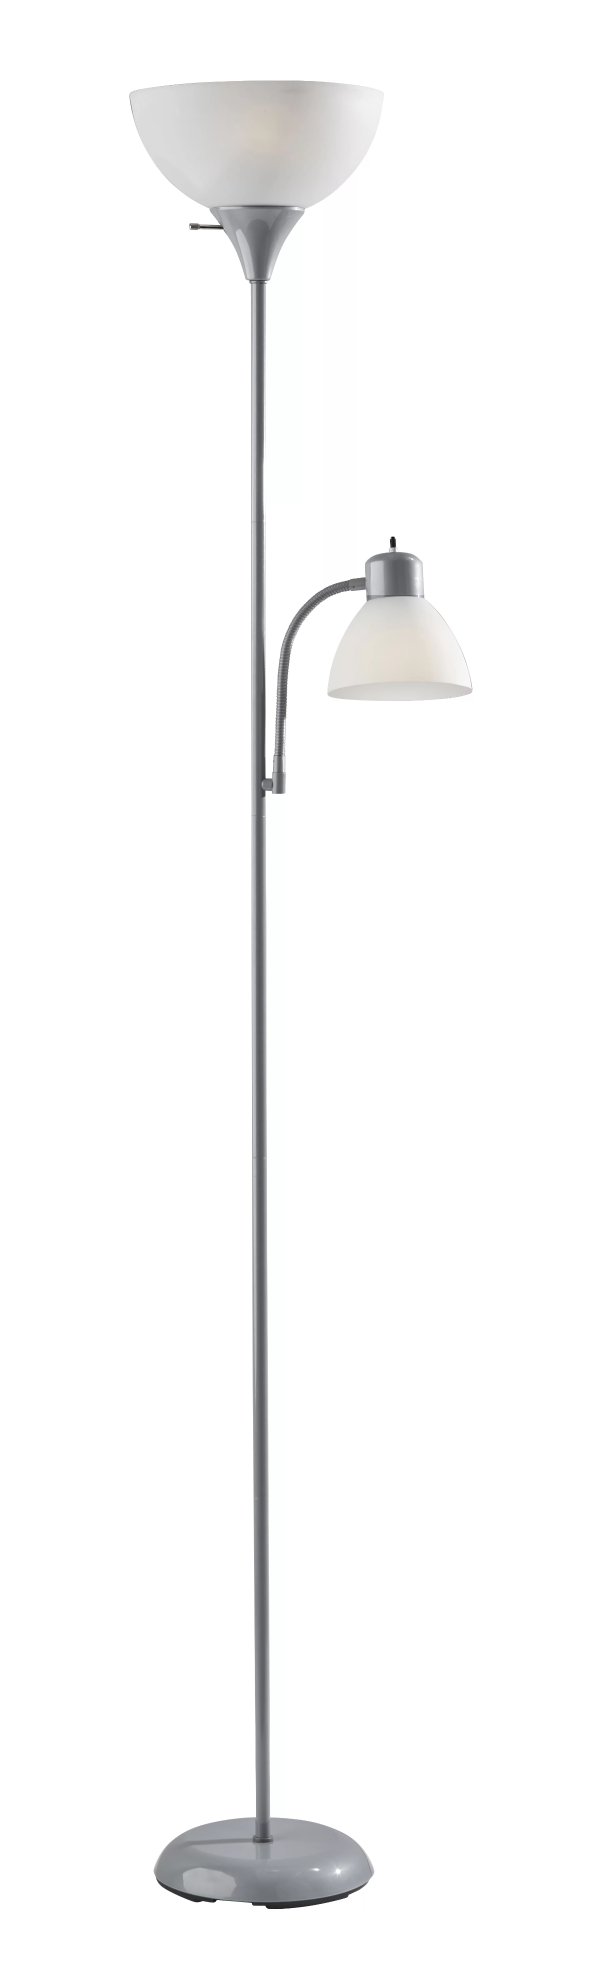 72'' Combo Floor Lamp with Adjustable Reading Lamp, Silver, Metal Material